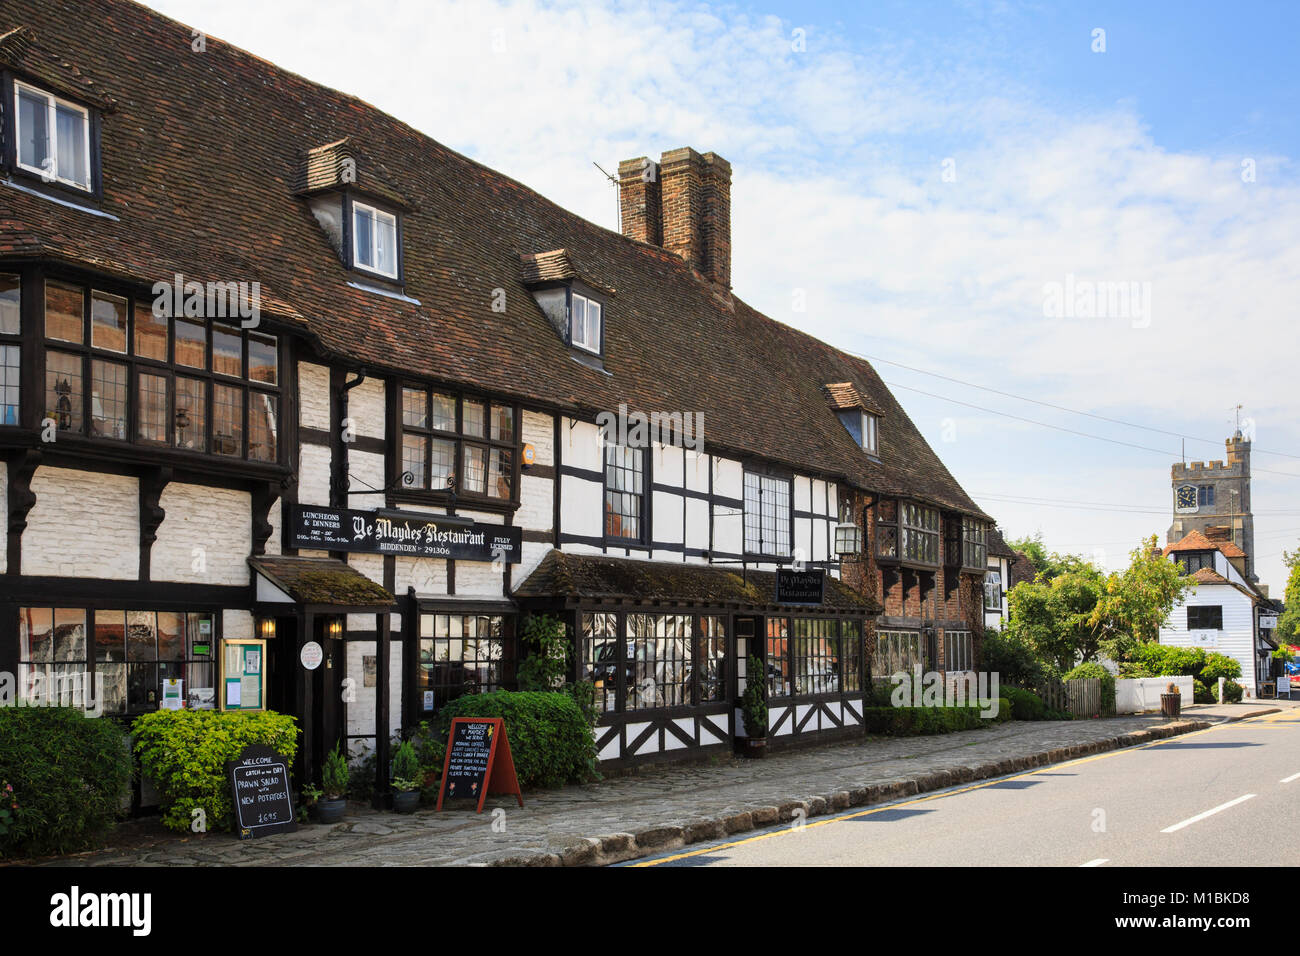 Ye Maydes Restaurant in a black and white timbered Tudor building on the main street through Biddenden, Kent, England, UK, Britain Stock Photo